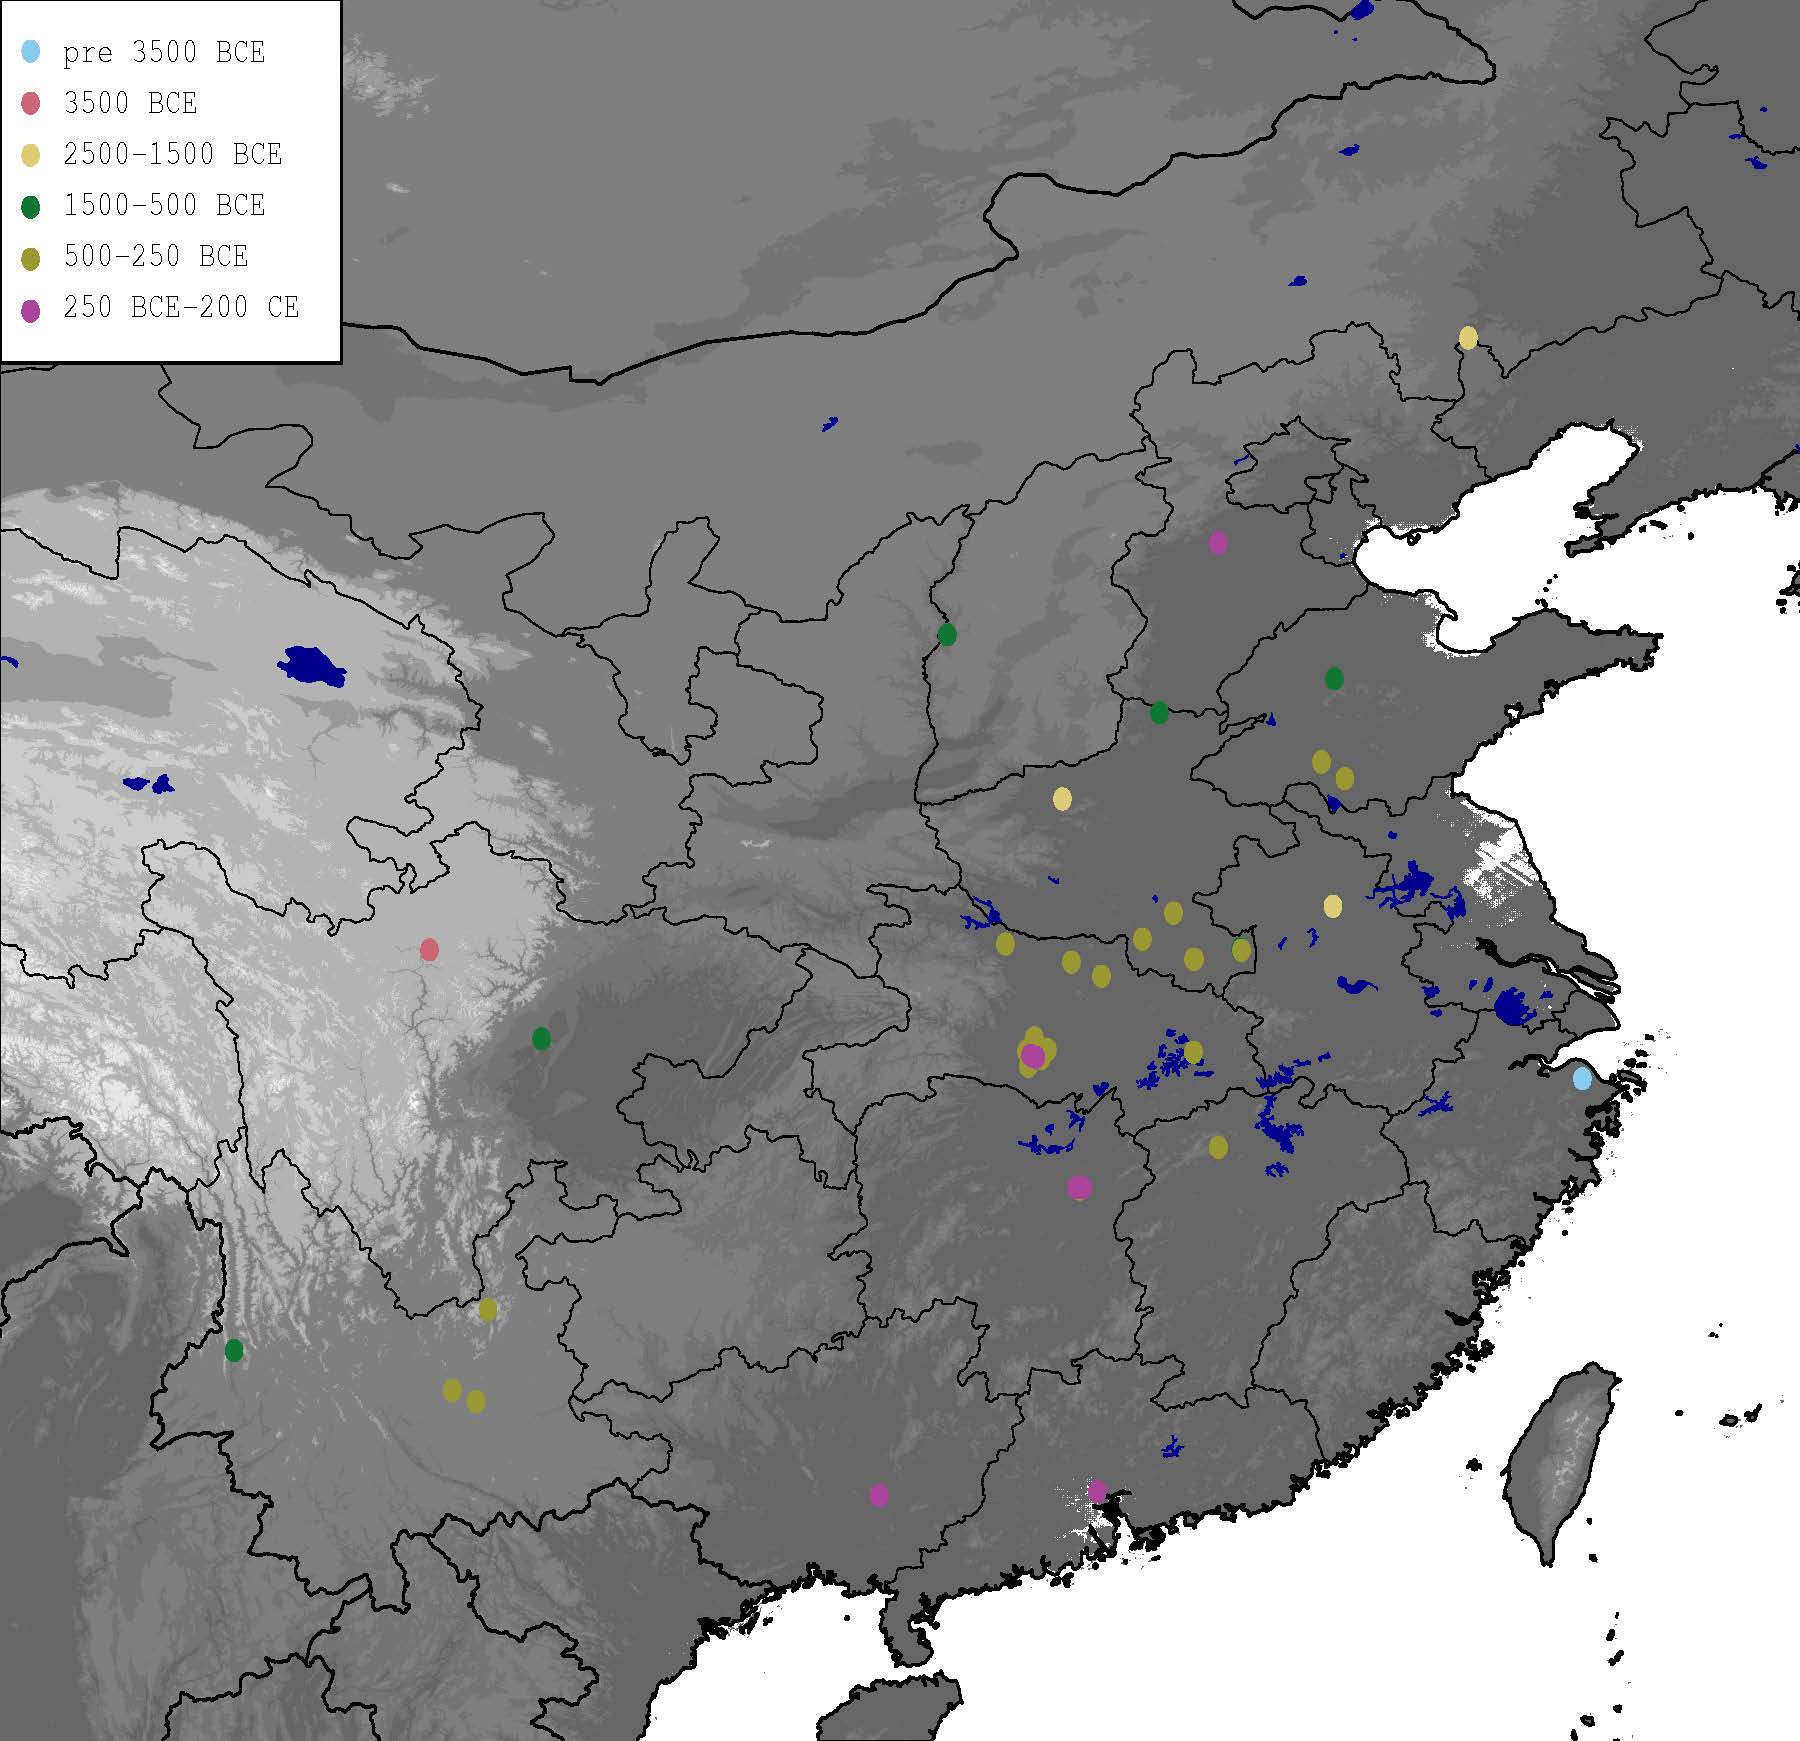 Early archaeological attestation of Zanthoxylum. A grayscale map of eastern China, with provinces outlined. Colorful dots pepper the map to indicate the sites of early archaeological attestation of Zanthoxylum, according to a legend indicating the corresponding time periods: light blue, pre 3500 BCE; orange, 3500 BCE; yellow, 2500–1500 BCE; dark green, 1500–500 BCE; light green, 500–250 BCE; pink, 250 BCE–200 CE.